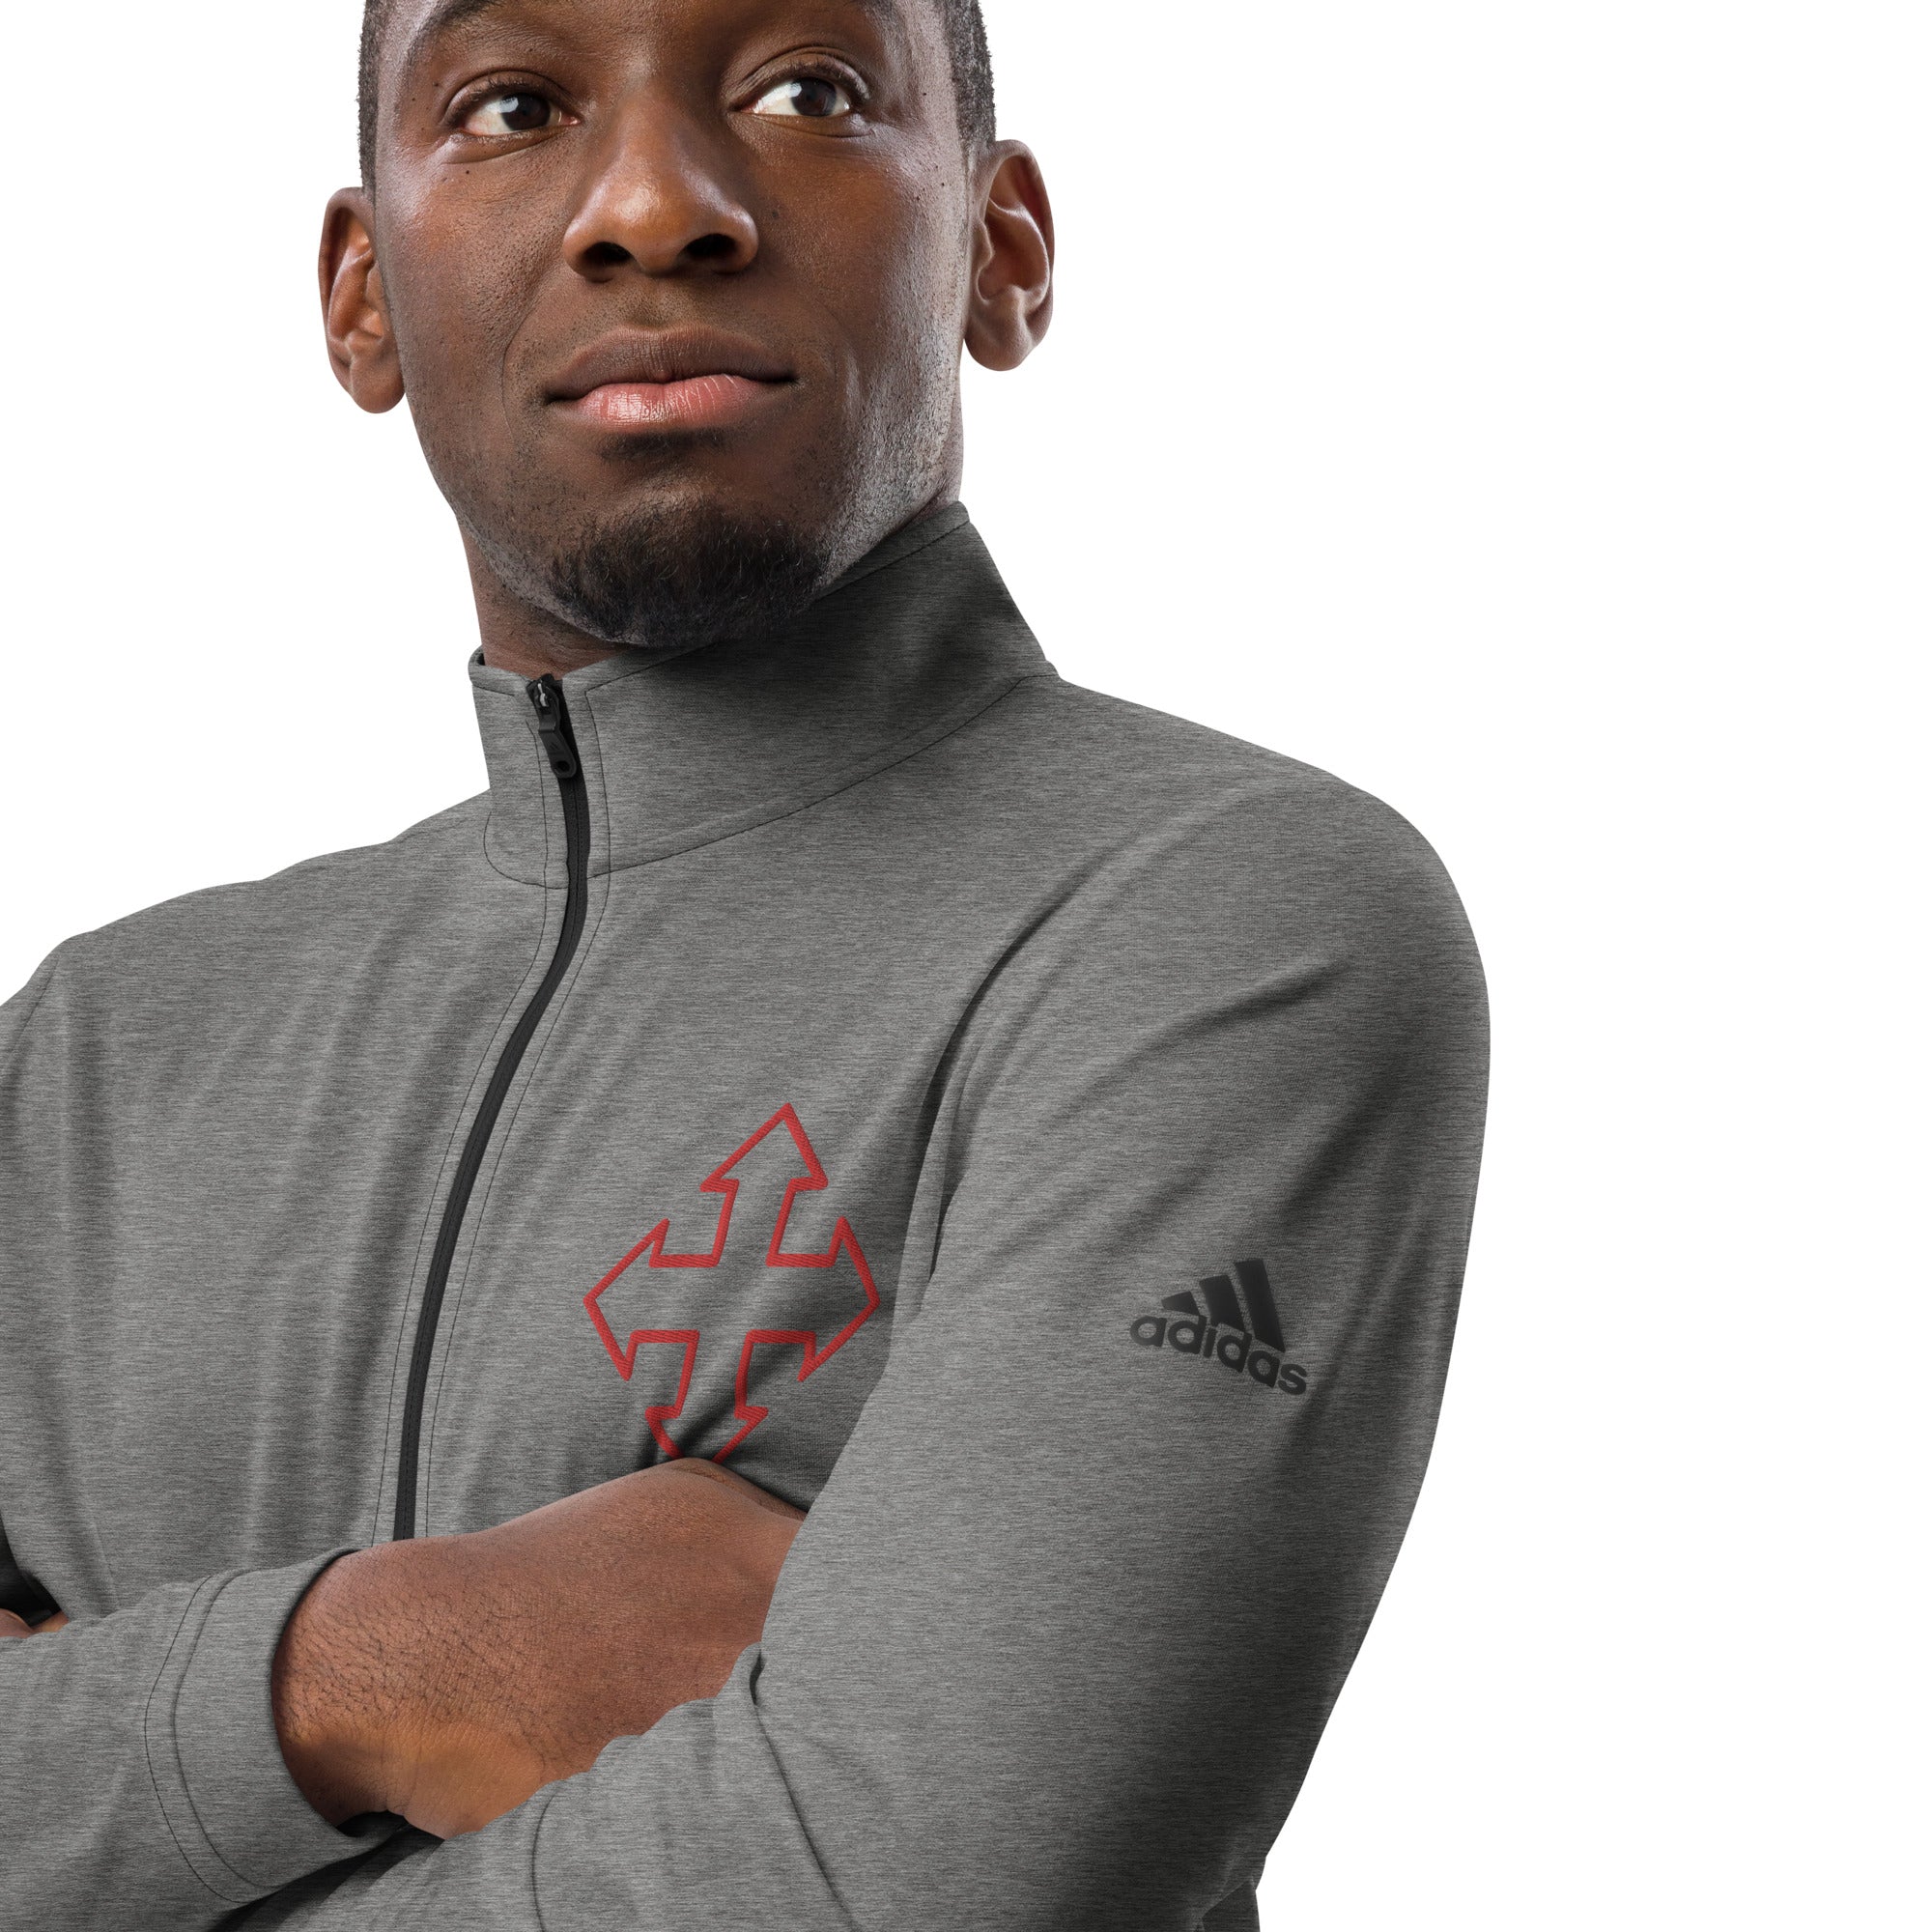 Quarter zip pullover, Workout, Eco-Friendly, Lightweight, Comfortable, Gift for Him , Gift for her